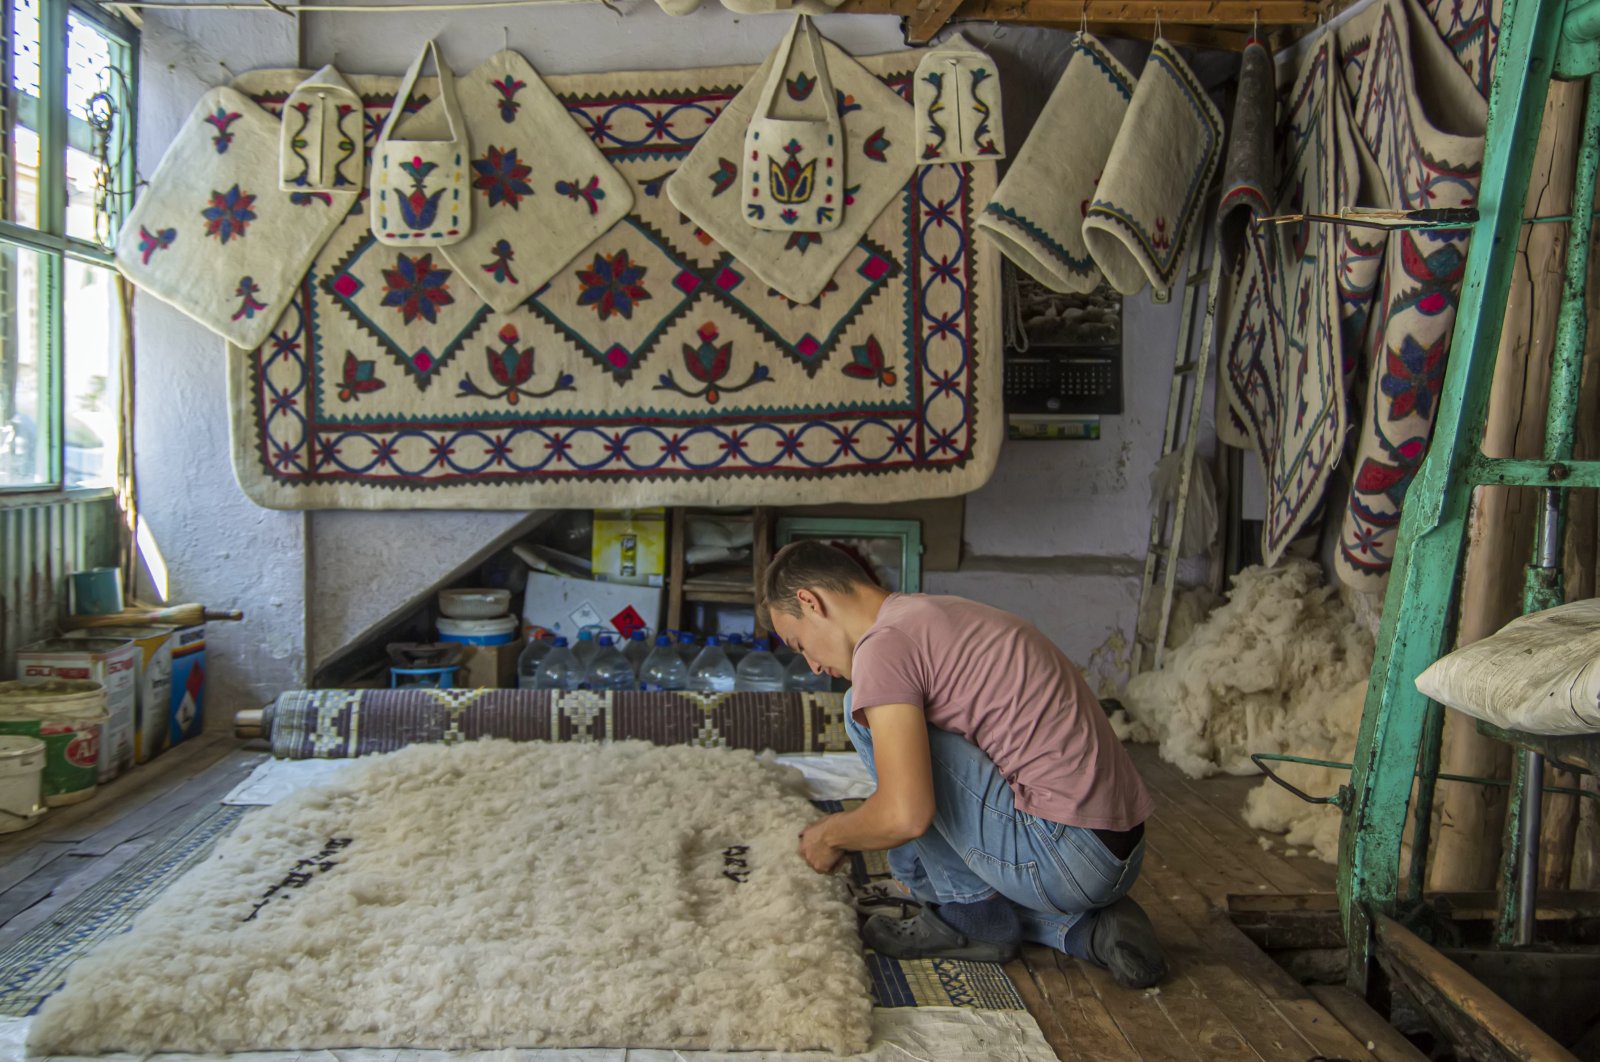 A Turkish master makes bags and covers from felt in Izmir, western Turkey, Dec. 1, 2020. (Shutterstock)